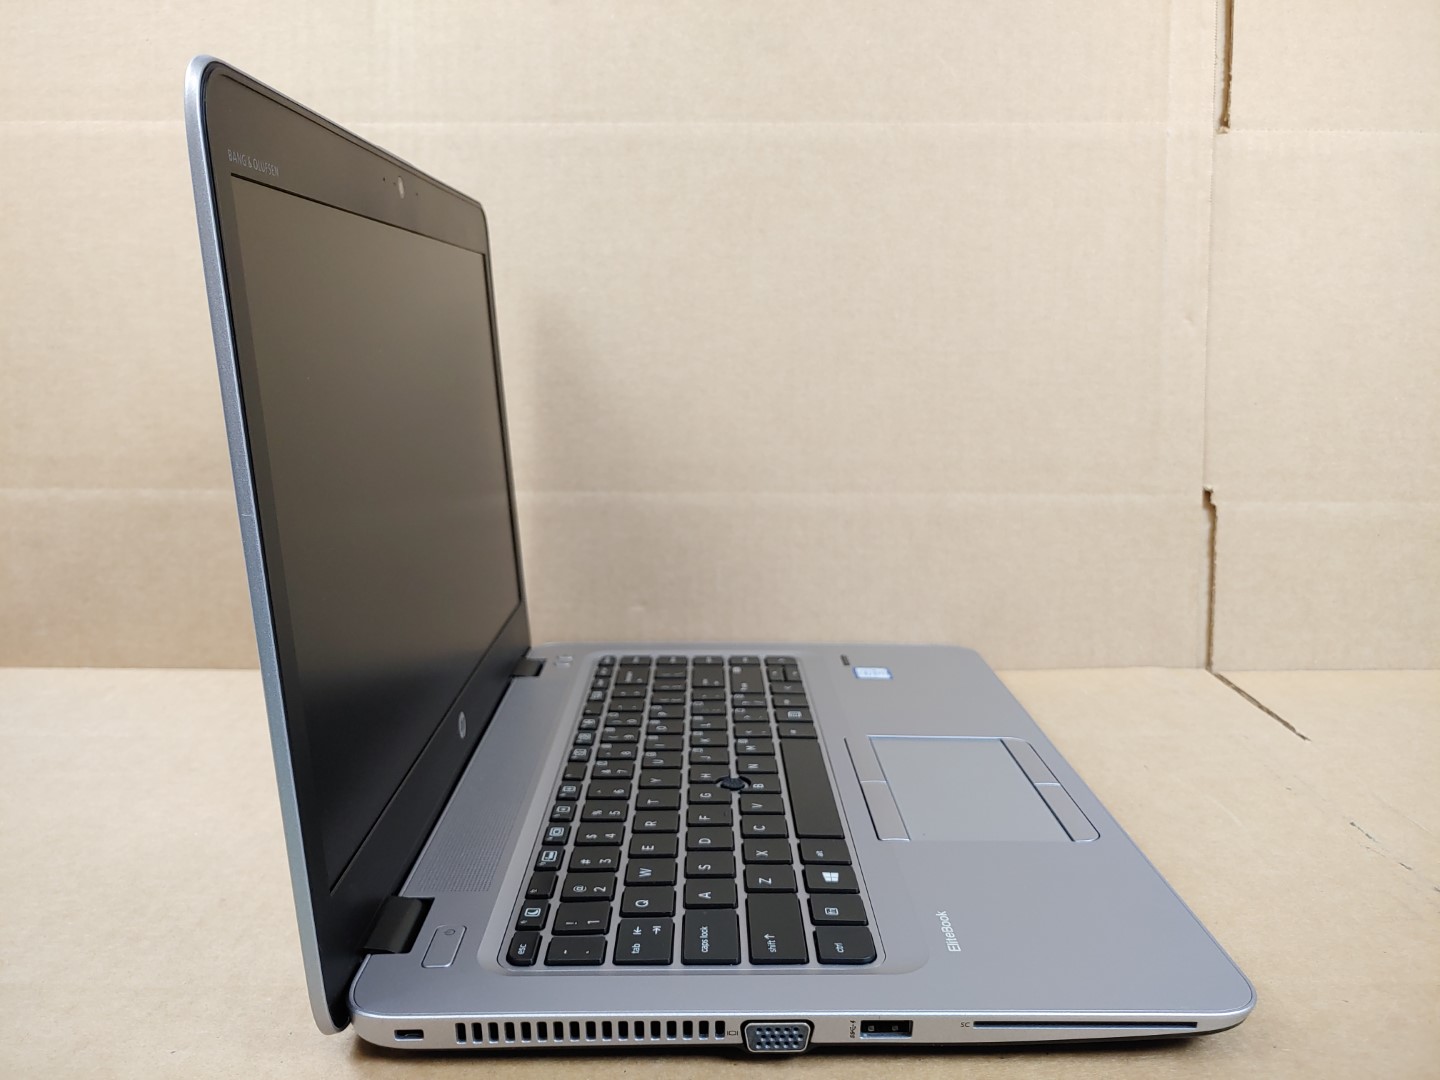 we have added actual images to this listing of the HP ProBook you would receive.  [ What is included: HP EliteBook + Power Adapter ]Item Specifics: MPN : EliteBook 840 G3UPC : N/AType : LaptopBrand : HPProduct Line : EliteBookModel : EliteBook 840 G3Operating System : Windows 11 ProScreen Size : 14-inchProcessor Type : Intel Core i5-6300U 6th GenProcessor Speed : 2.40GHz / 2.50GHzGraphics Processing Type : Intel(R) HD Graphics 520Memory : 12GBHard Drive Capacity : 128GB SSD - 1